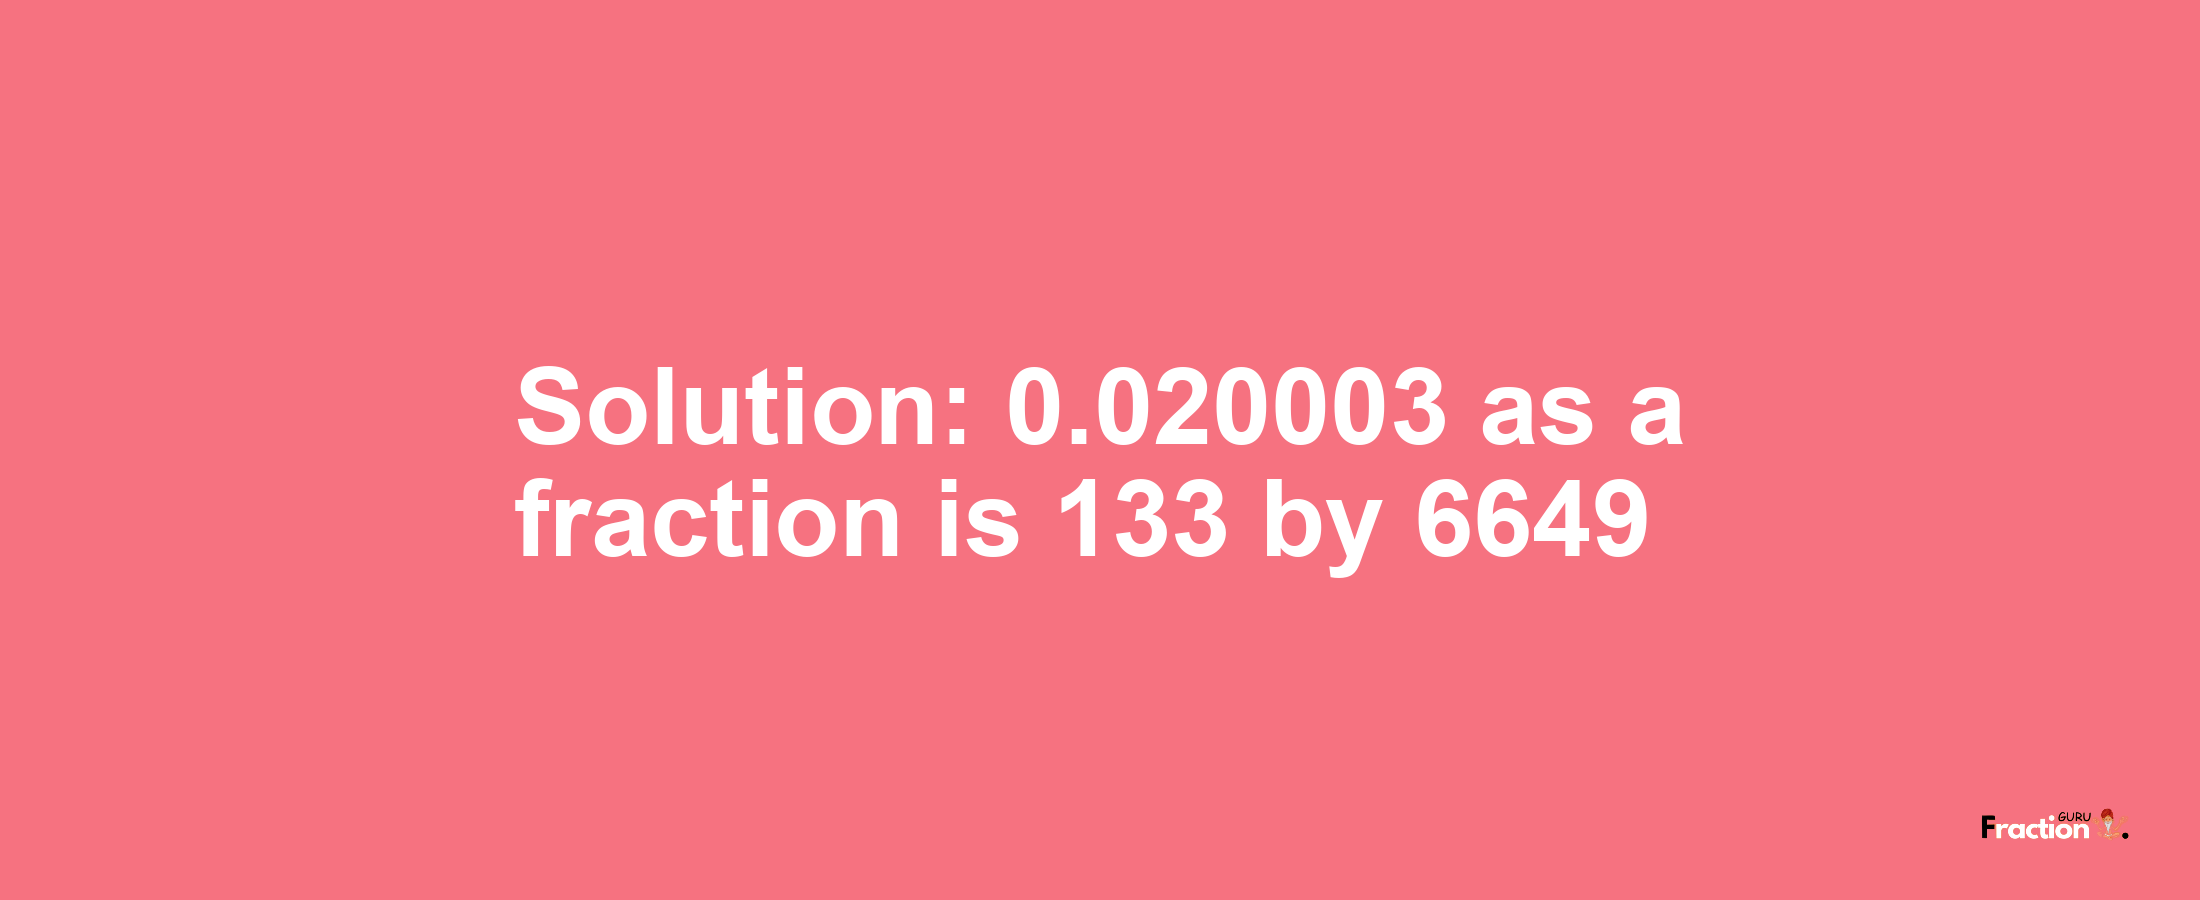 Solution:0.020003 as a fraction is 133/6649